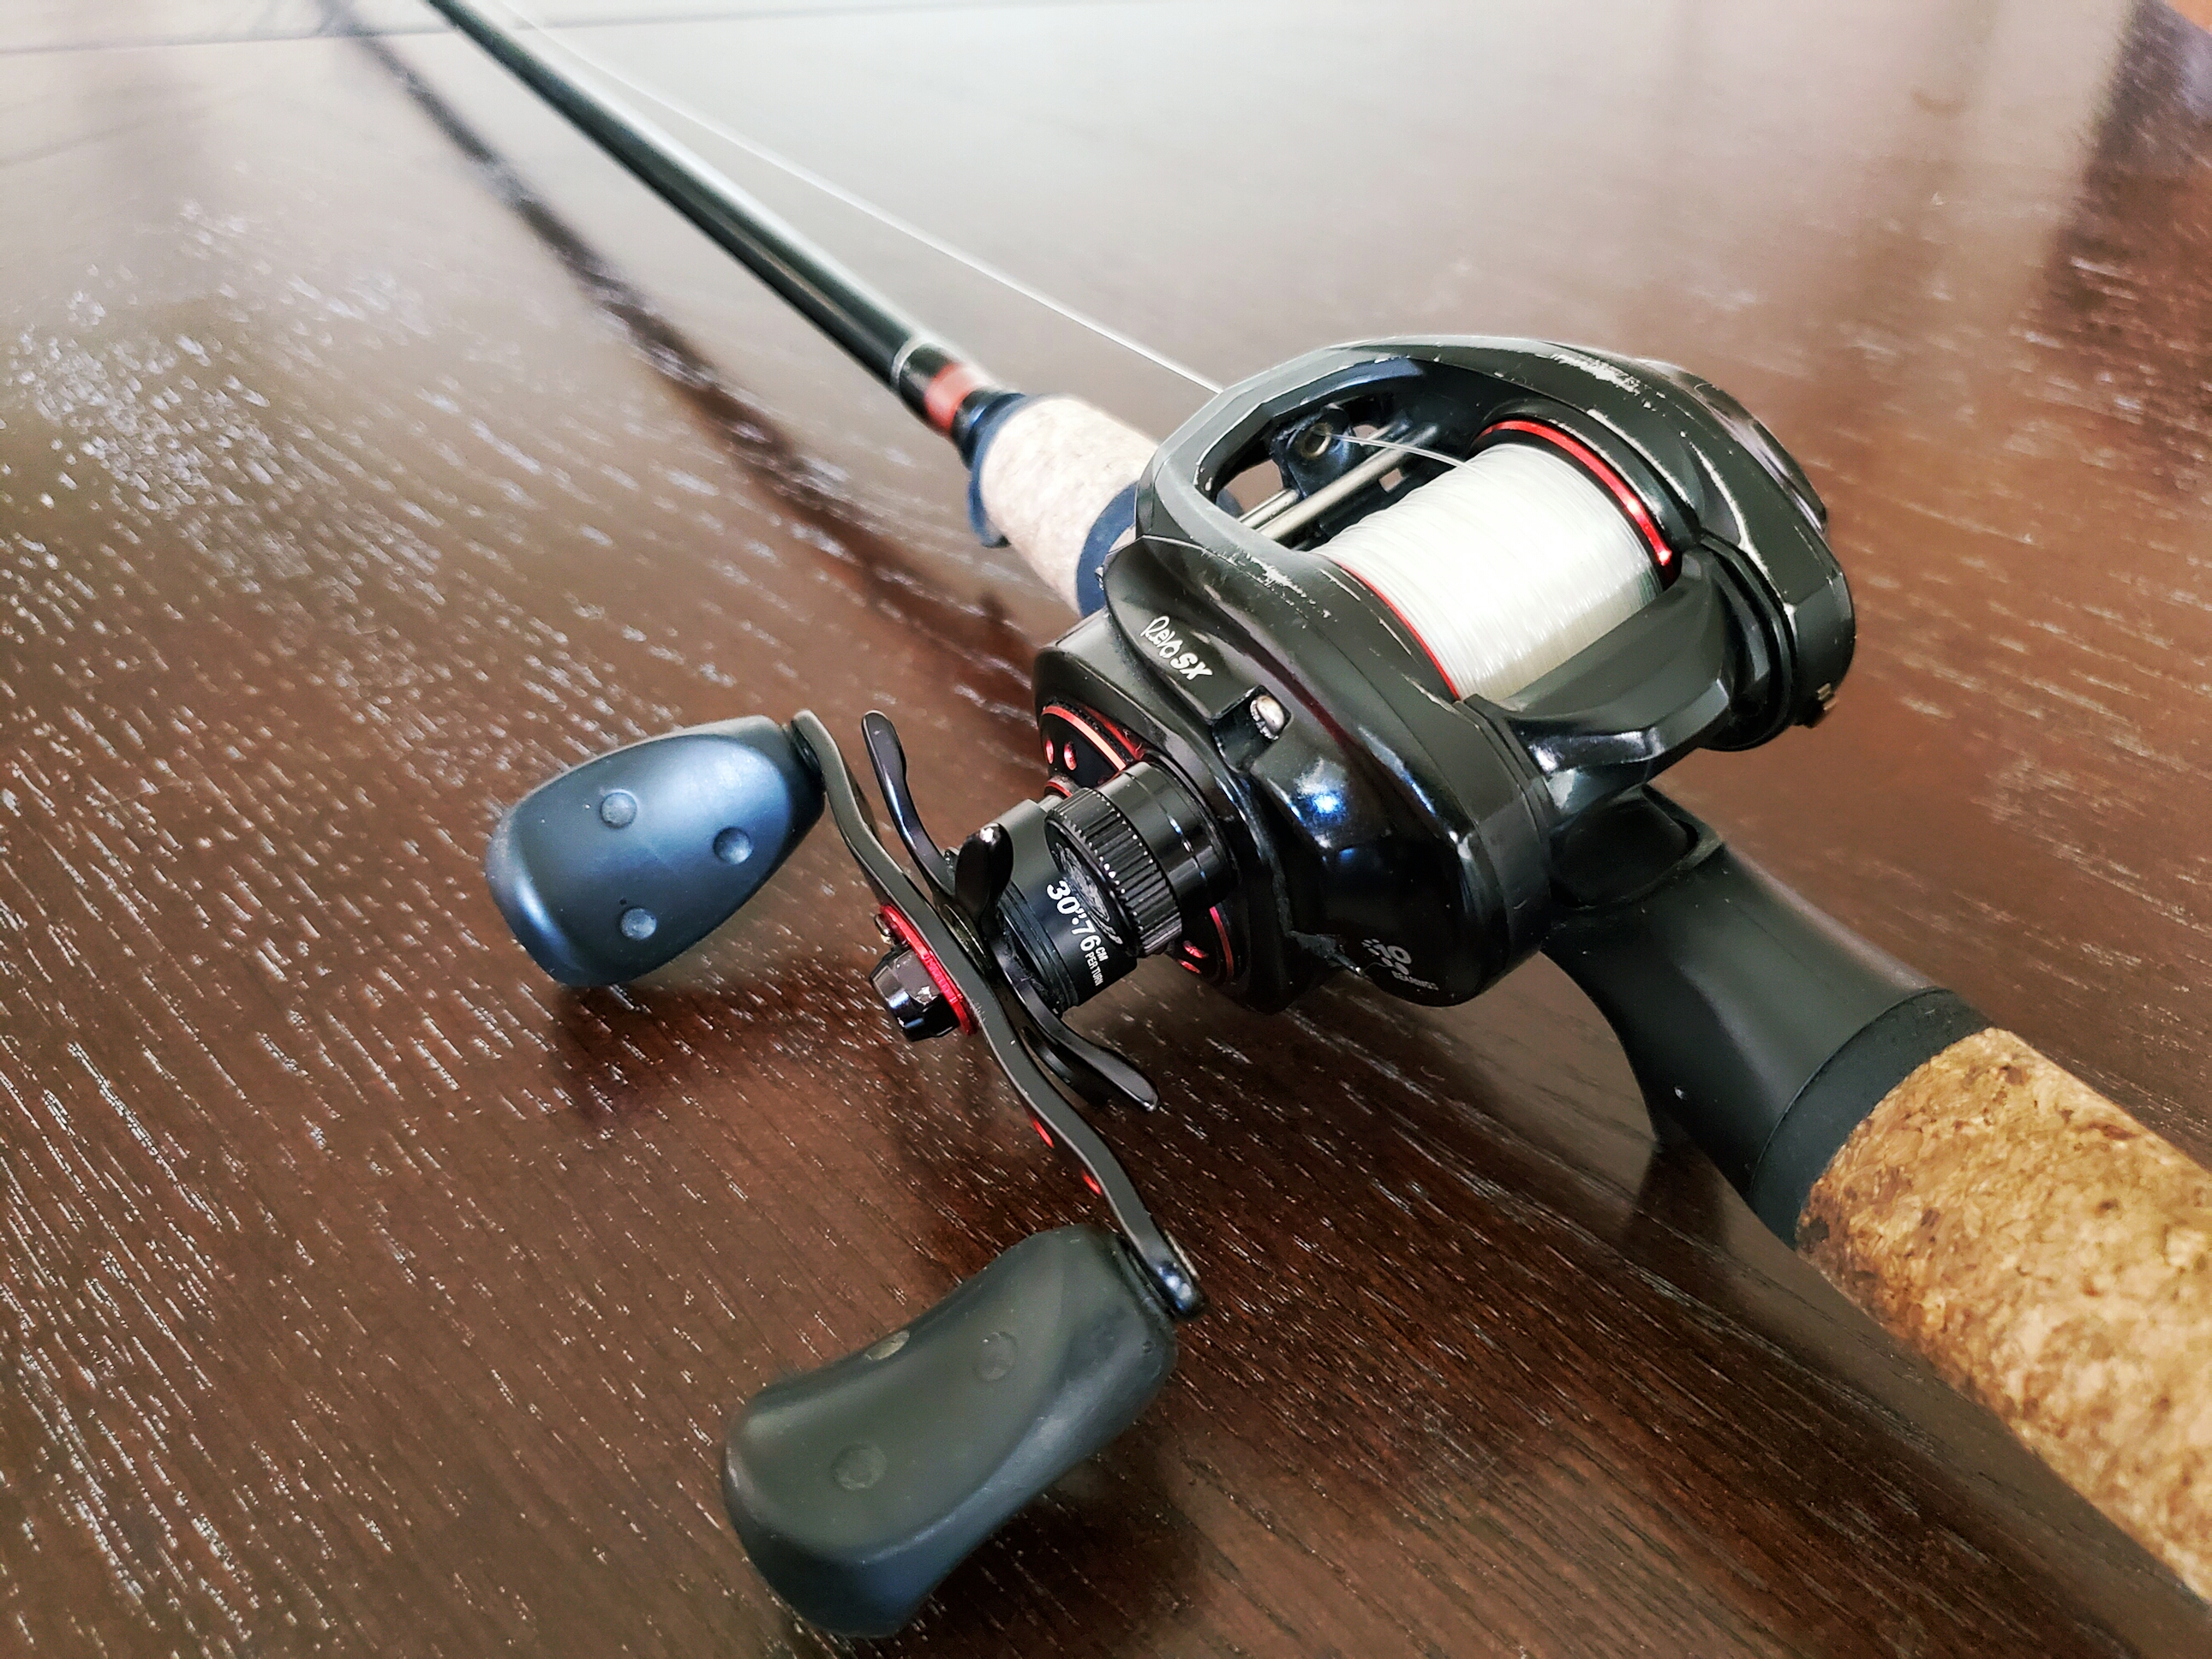 Abu Garcia Revo SX baitcaster fishing reel on a Temple Fork Outfitters casting rod